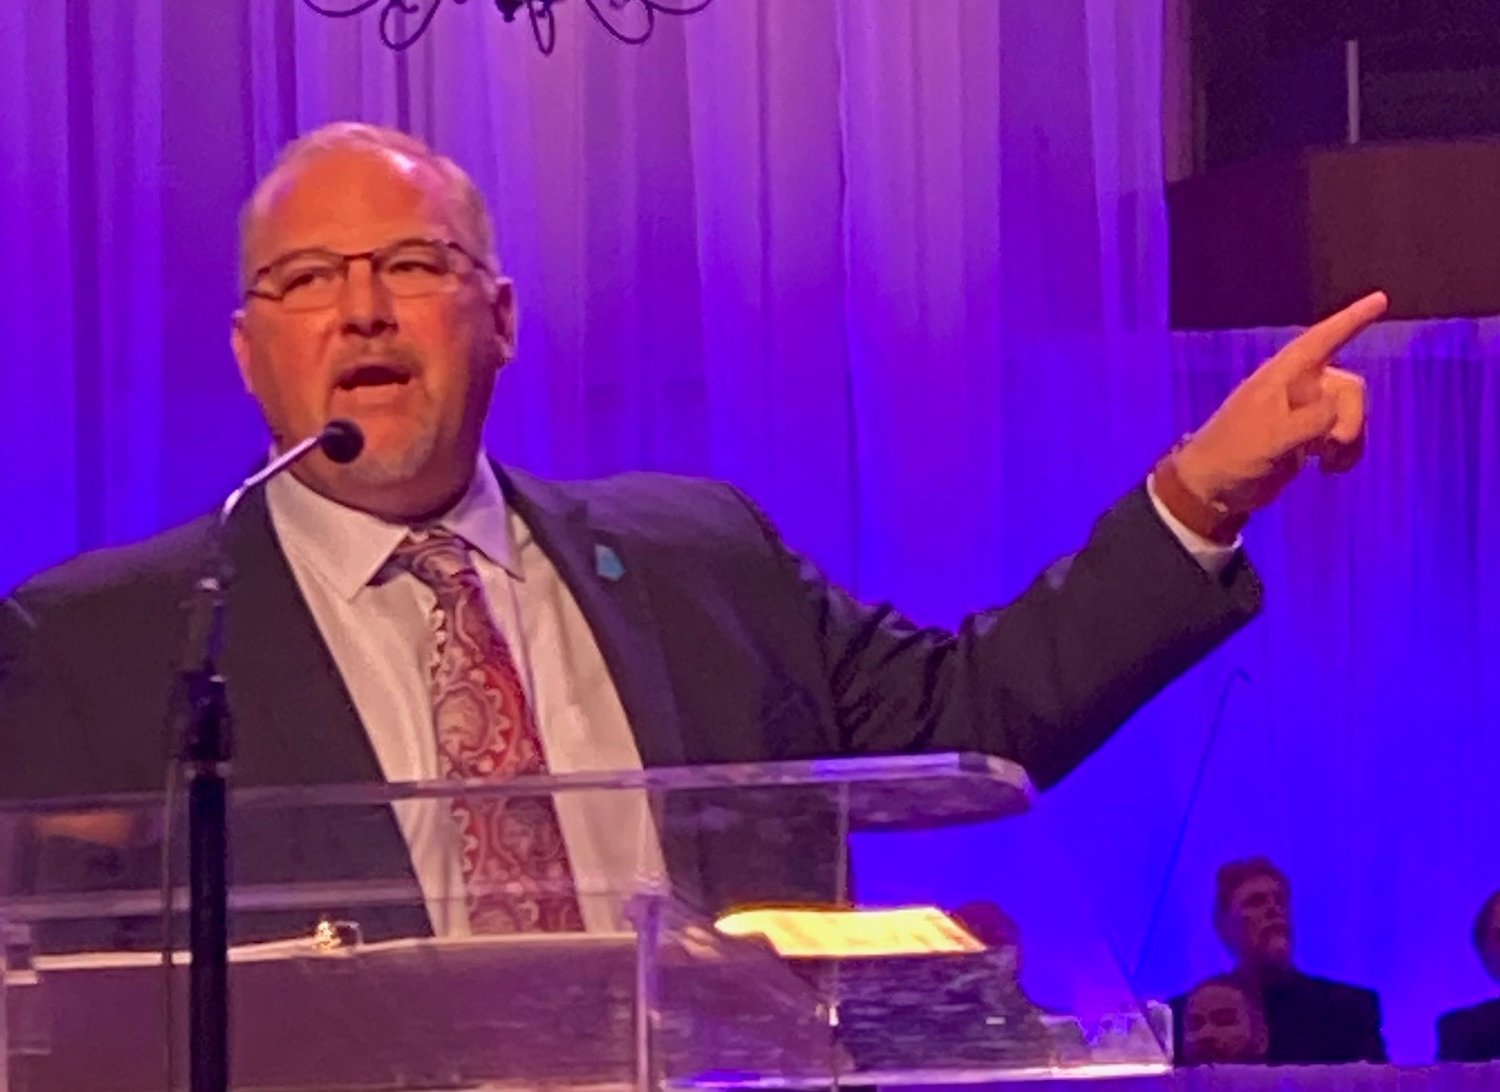 Kevin Williams, pastor of First Baptist Church of Villa Rica, has been re-elected to a second term as president of the Georgia Baptist Convention. (Index/Roger Alford)